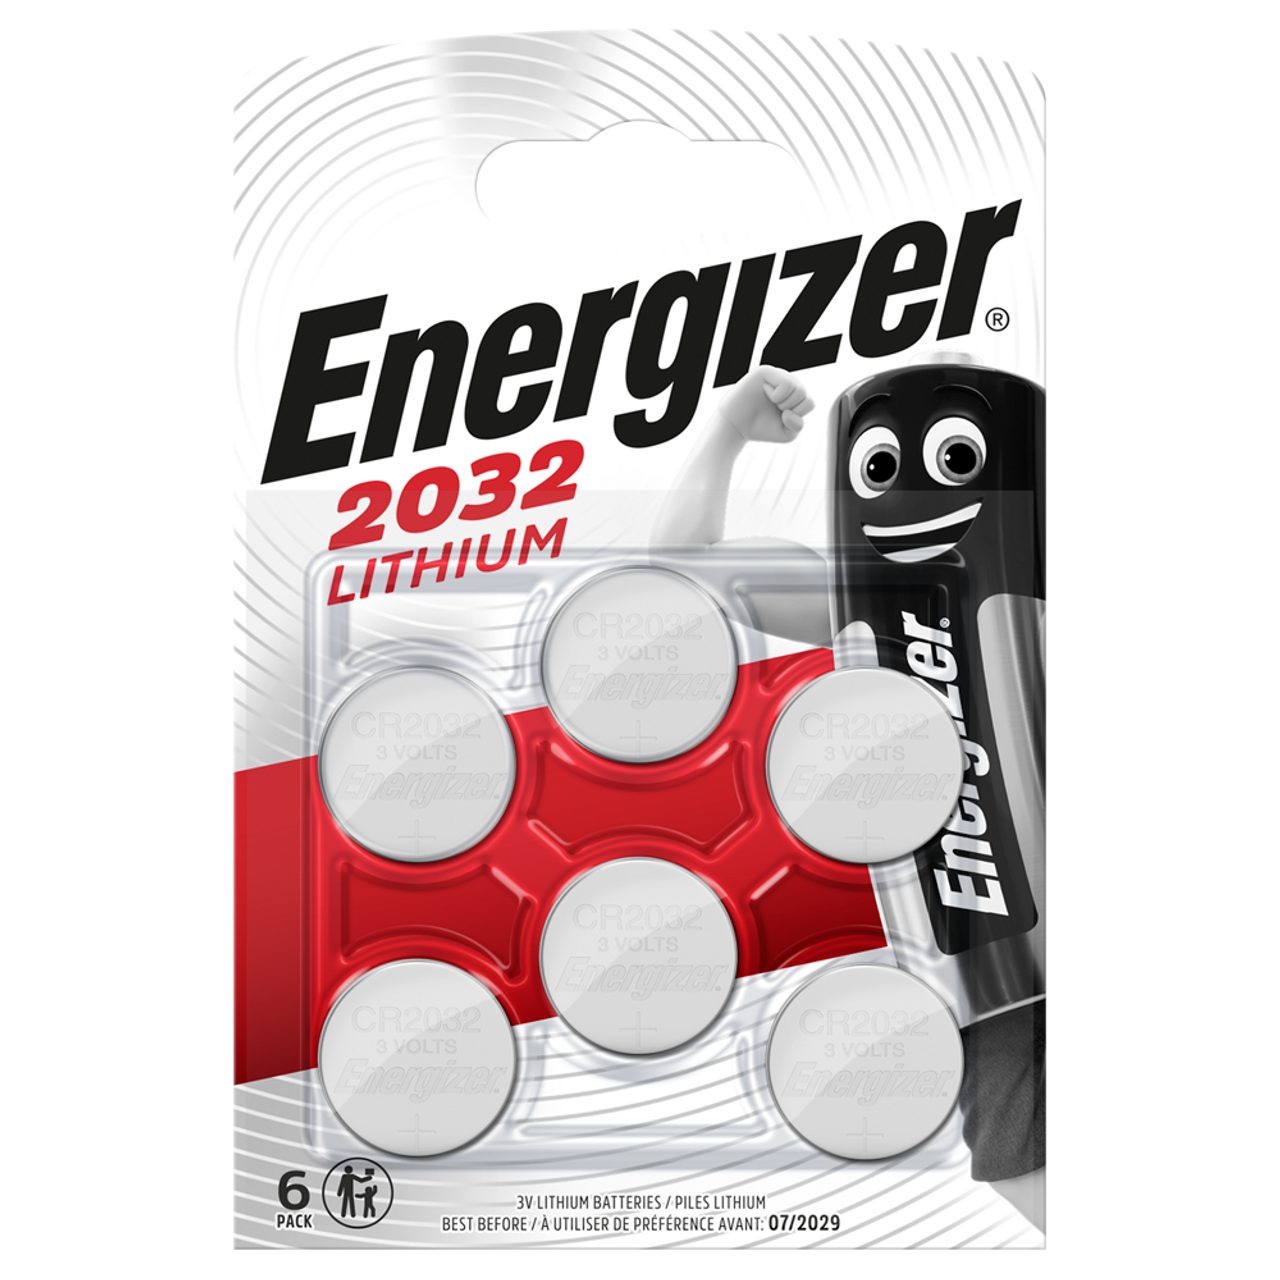 2 x Genuine ENERGIZER 2032 DL2032 CR2032 Coin Cell Battery 3v Lithium